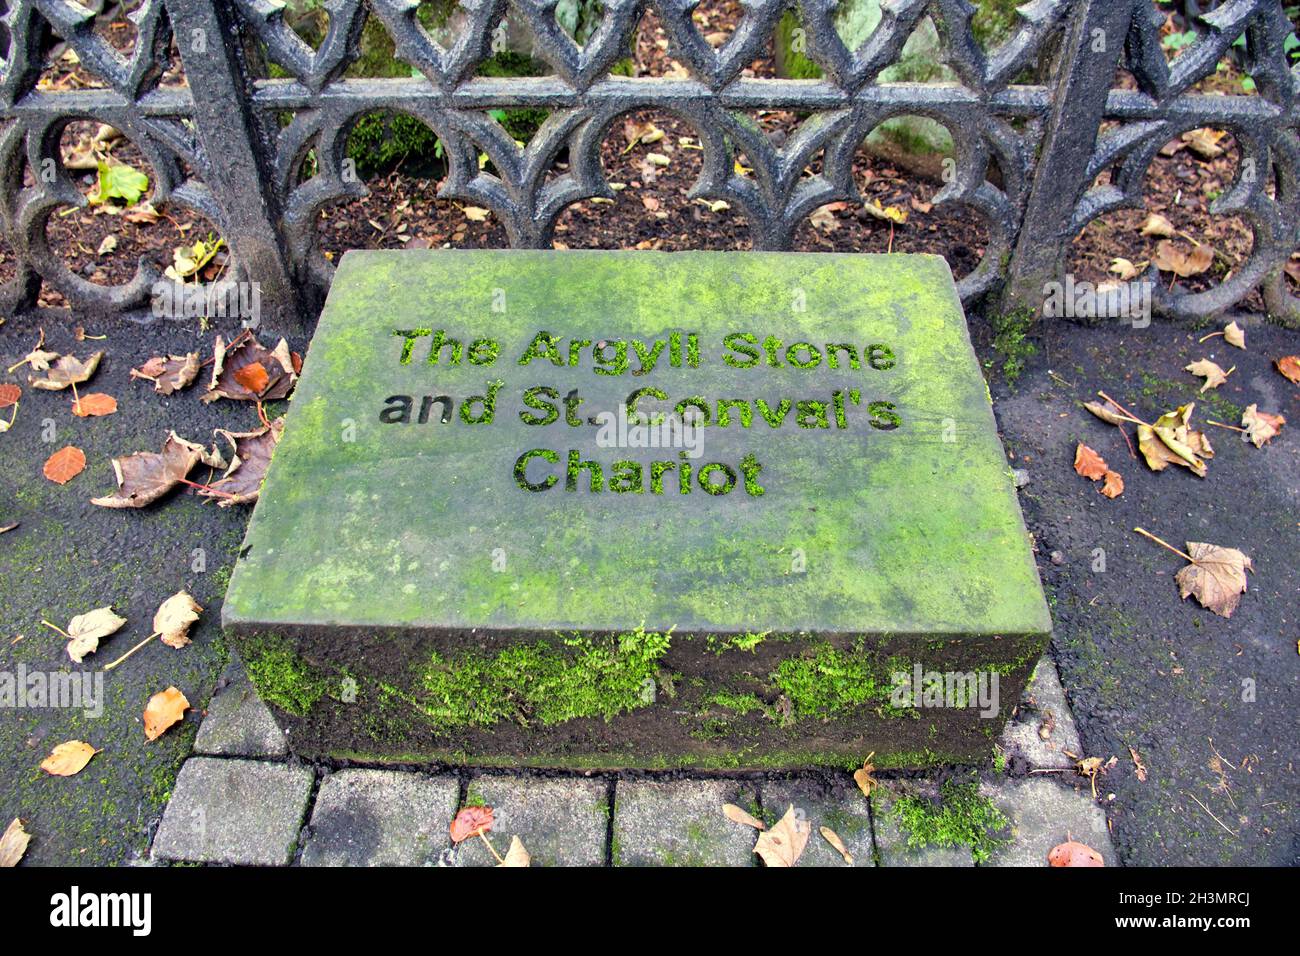 St Conval's Chariot  is the nearer of the two stonea and the Argyle Stone further away  im renfrew, scotland, uk Stock Photo